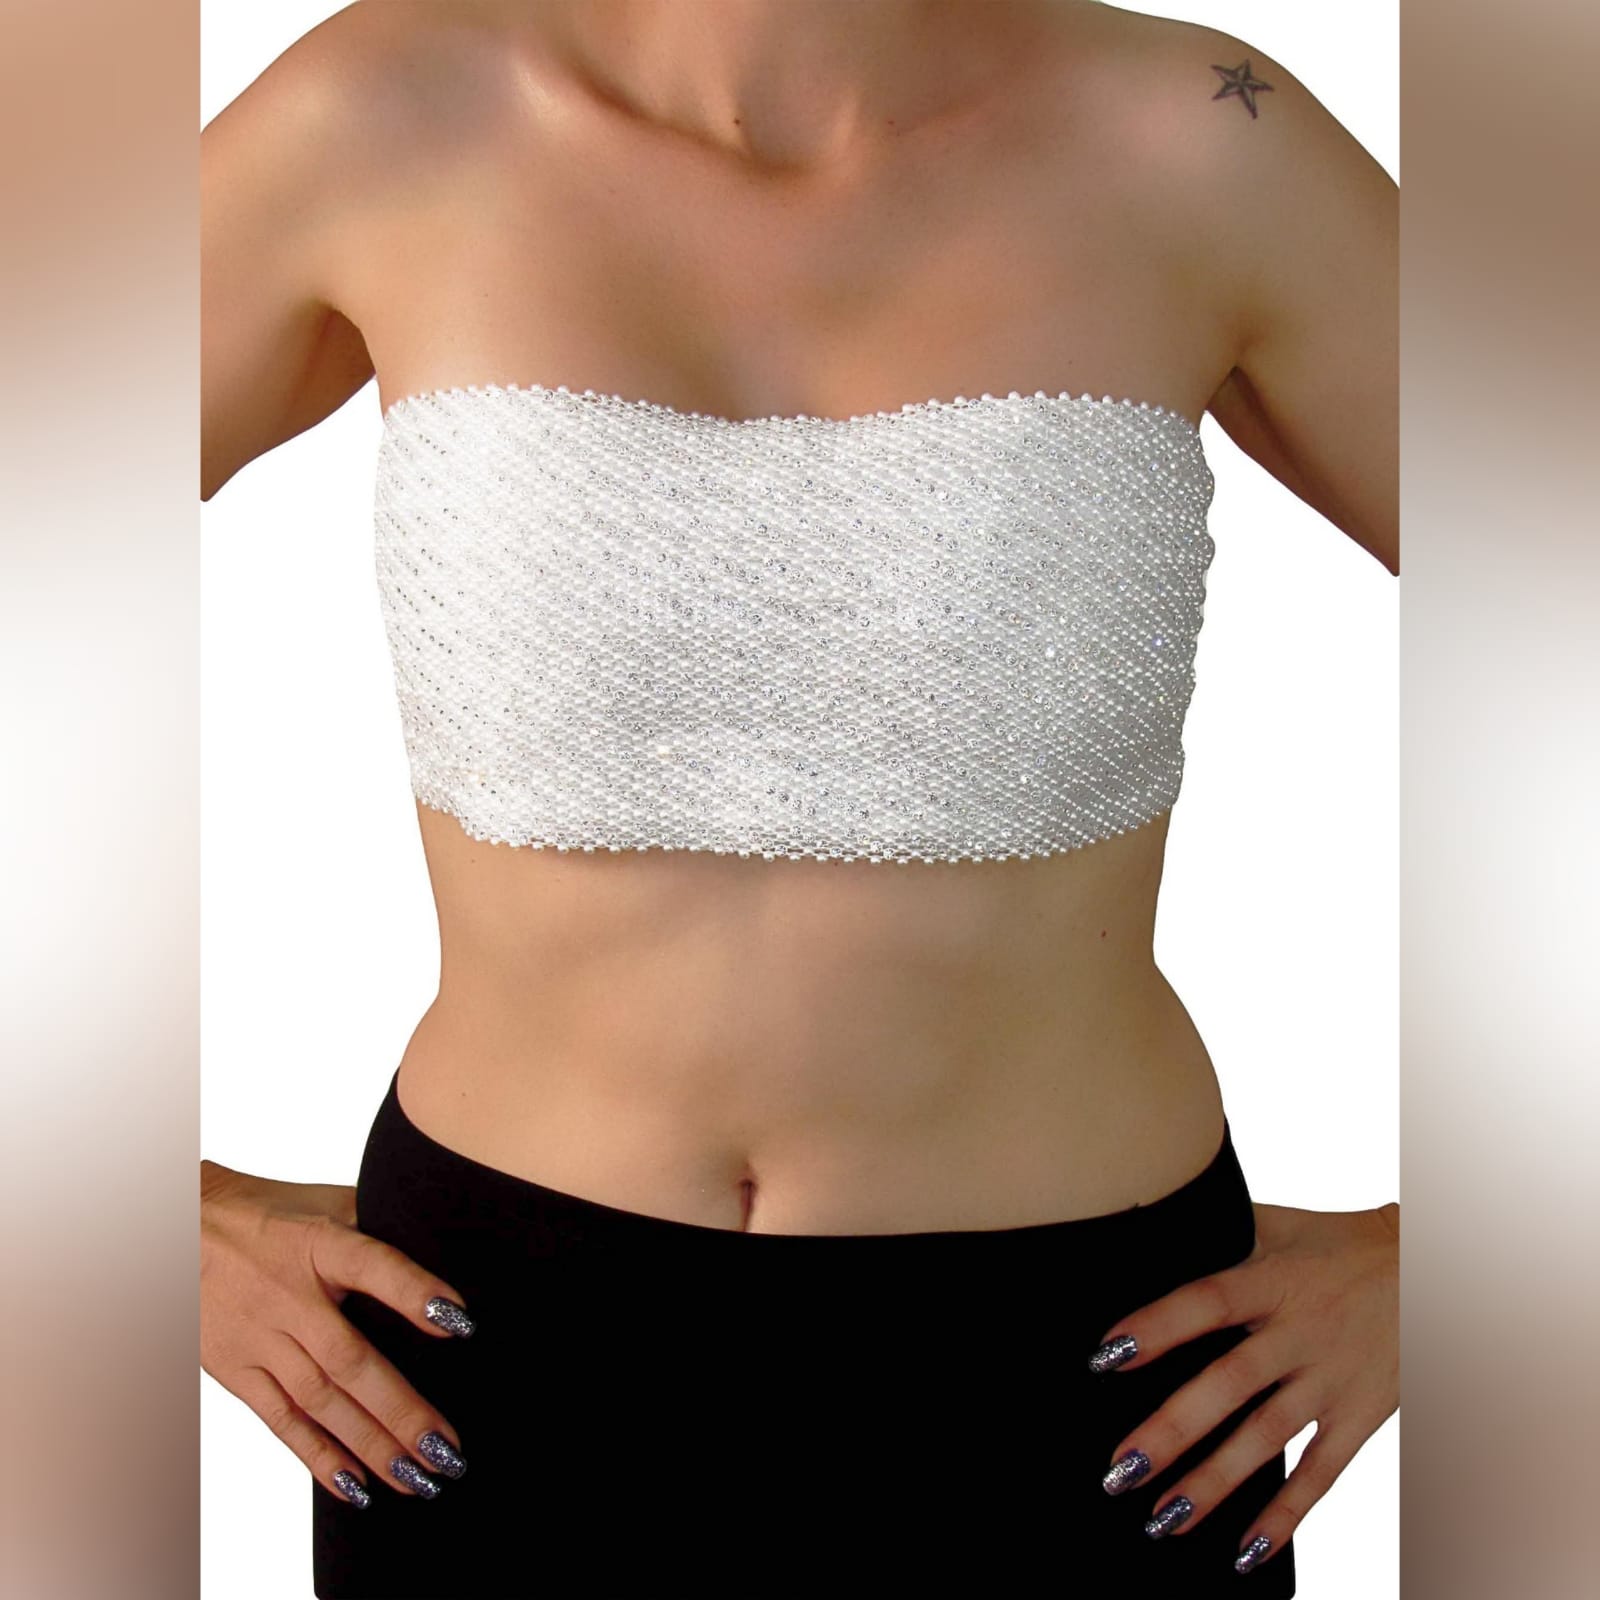 White boobtube tie up strap crop top 3 white boob-tube tie up strap crop top, with a beaded front. Handmade, one of a kind short top, great for the young woman that wants to look unique and feel sexy. This short sexy top fits a small, medium or large as you can just tie it tighter or looser. It is a great smart casual top, for a night out of dancing and fun. Can also be worn more casual on a lovely summer day as your one of a kind summer top.